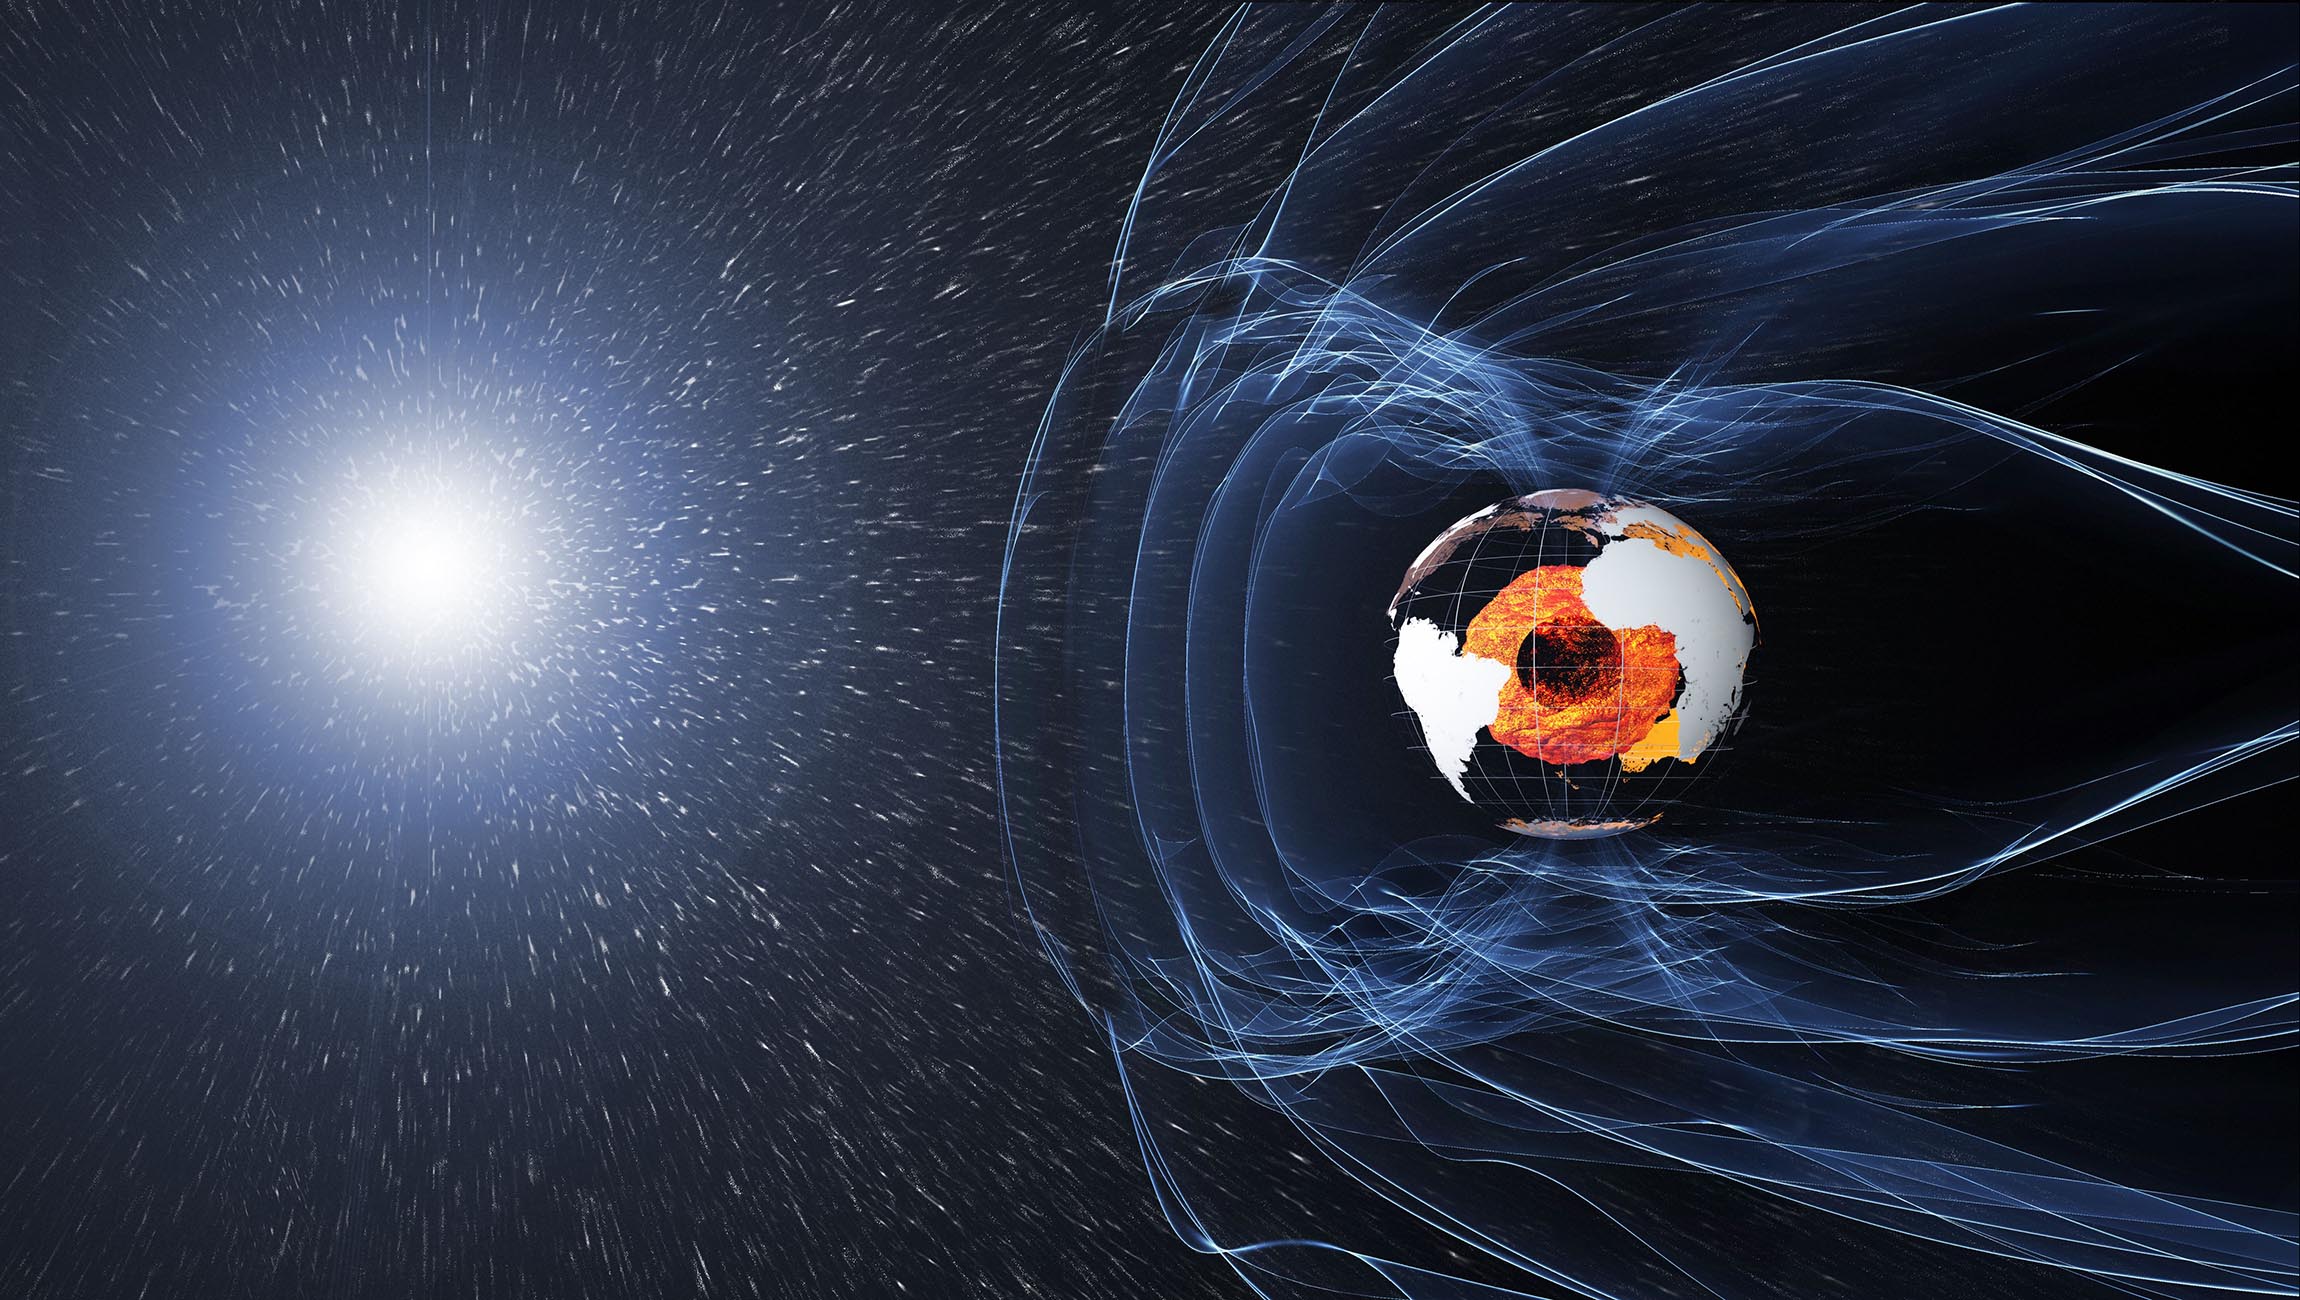 What If Earth's Magnetic Field Disappeared?